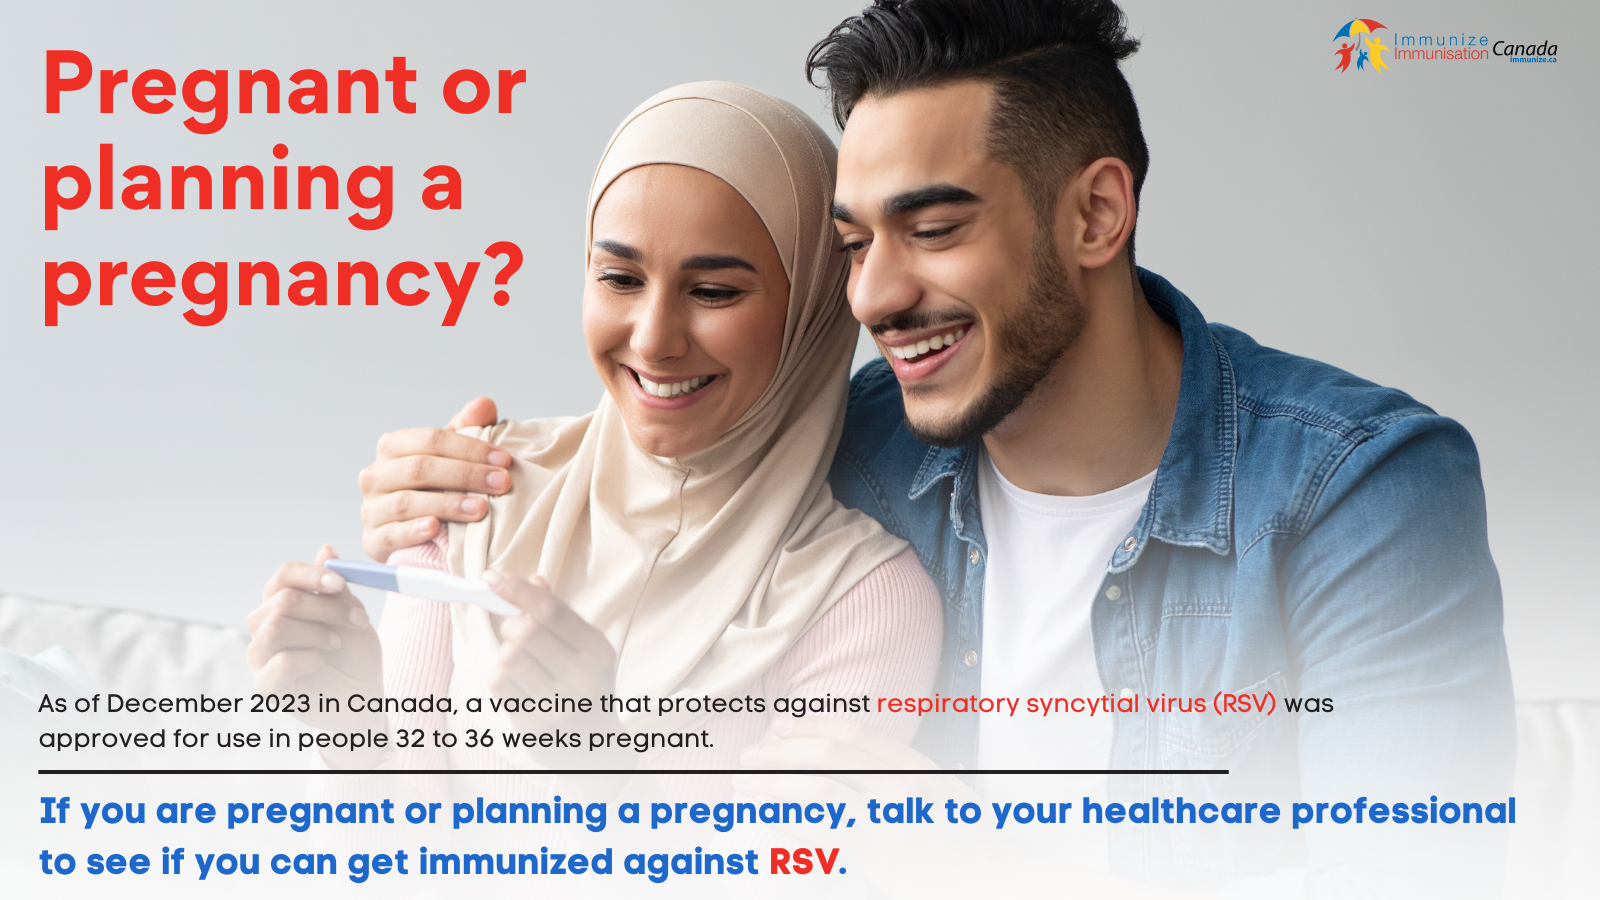 Pregnant or planning a pregnancy? (RSV vaccine) - social media image for Twitter